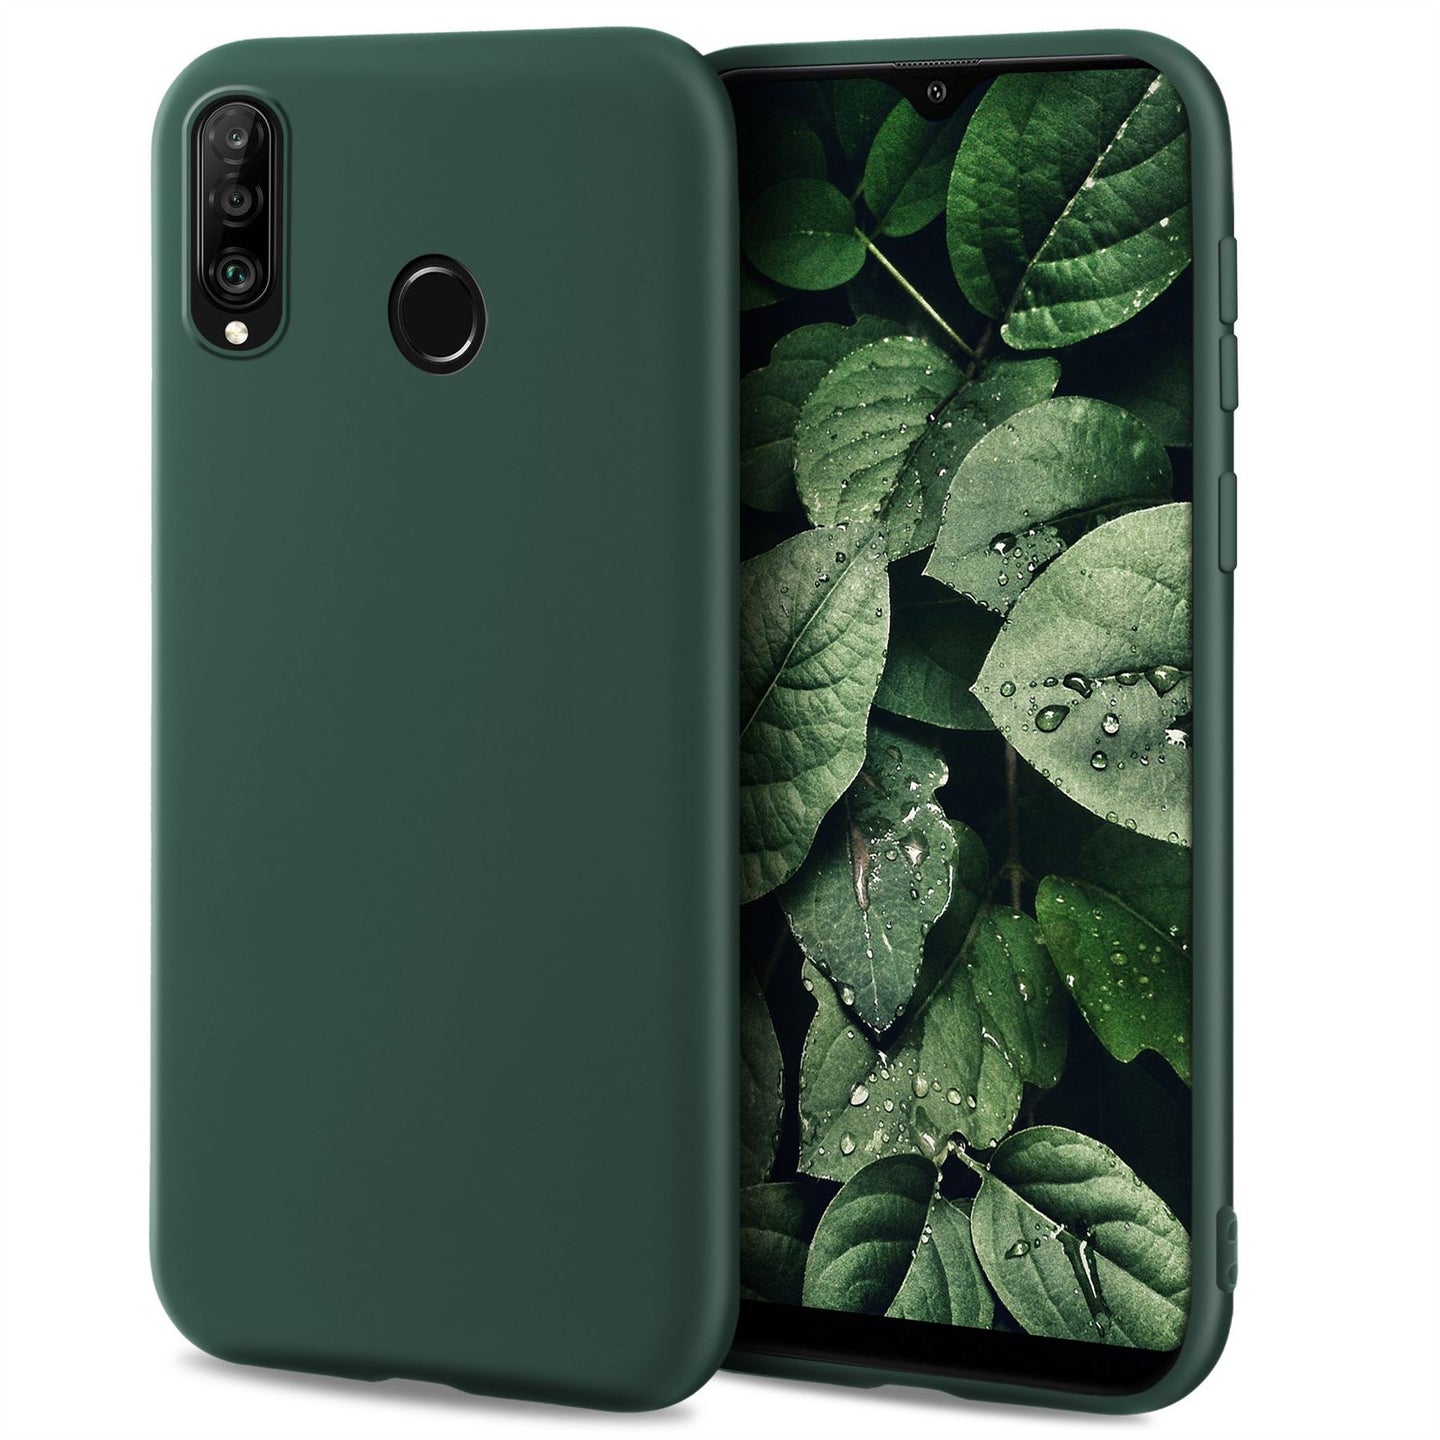 Moozy Minimalist Series Silicone Case for Huawei P30 Lite, Midnight Green - Matte Finish Slim Soft TPU Cover